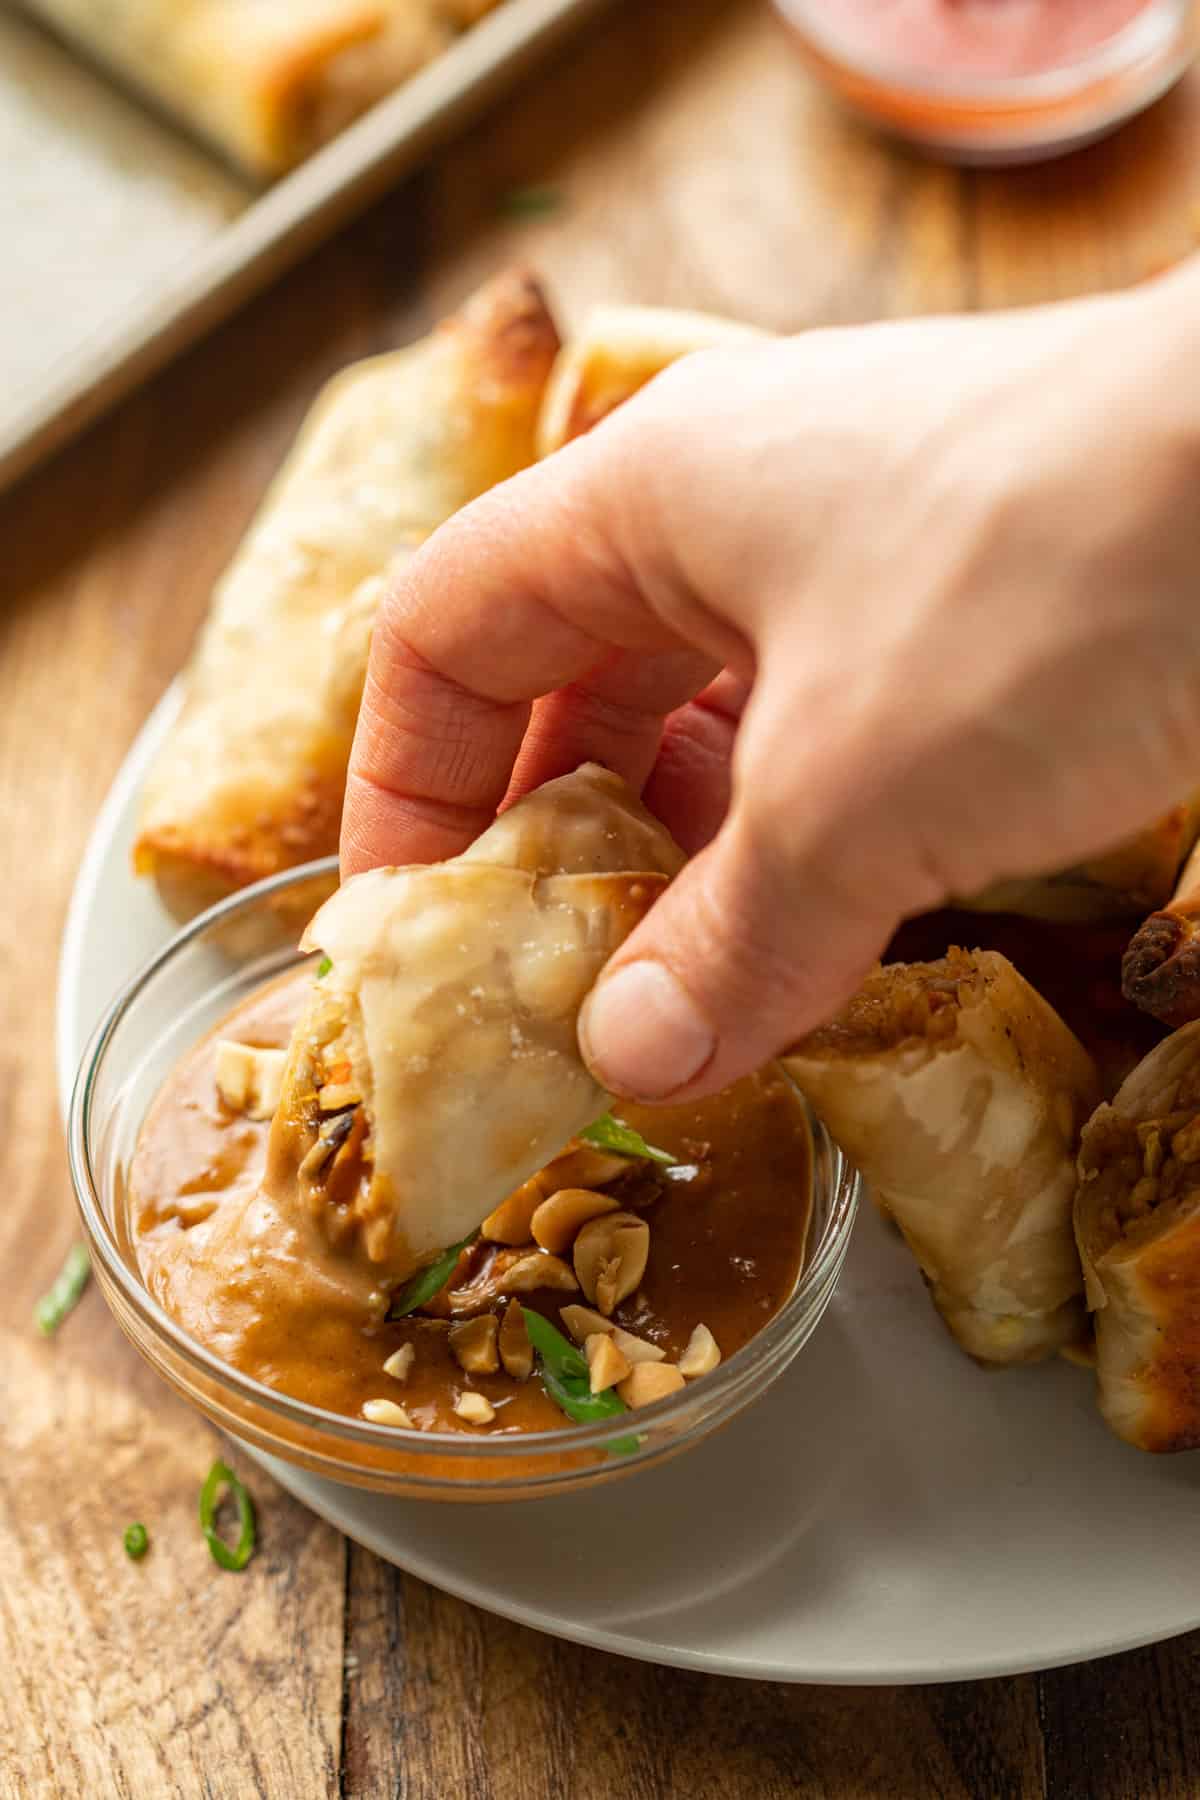 Hand dipping half of a spring roll into a dish of peanut sauce.